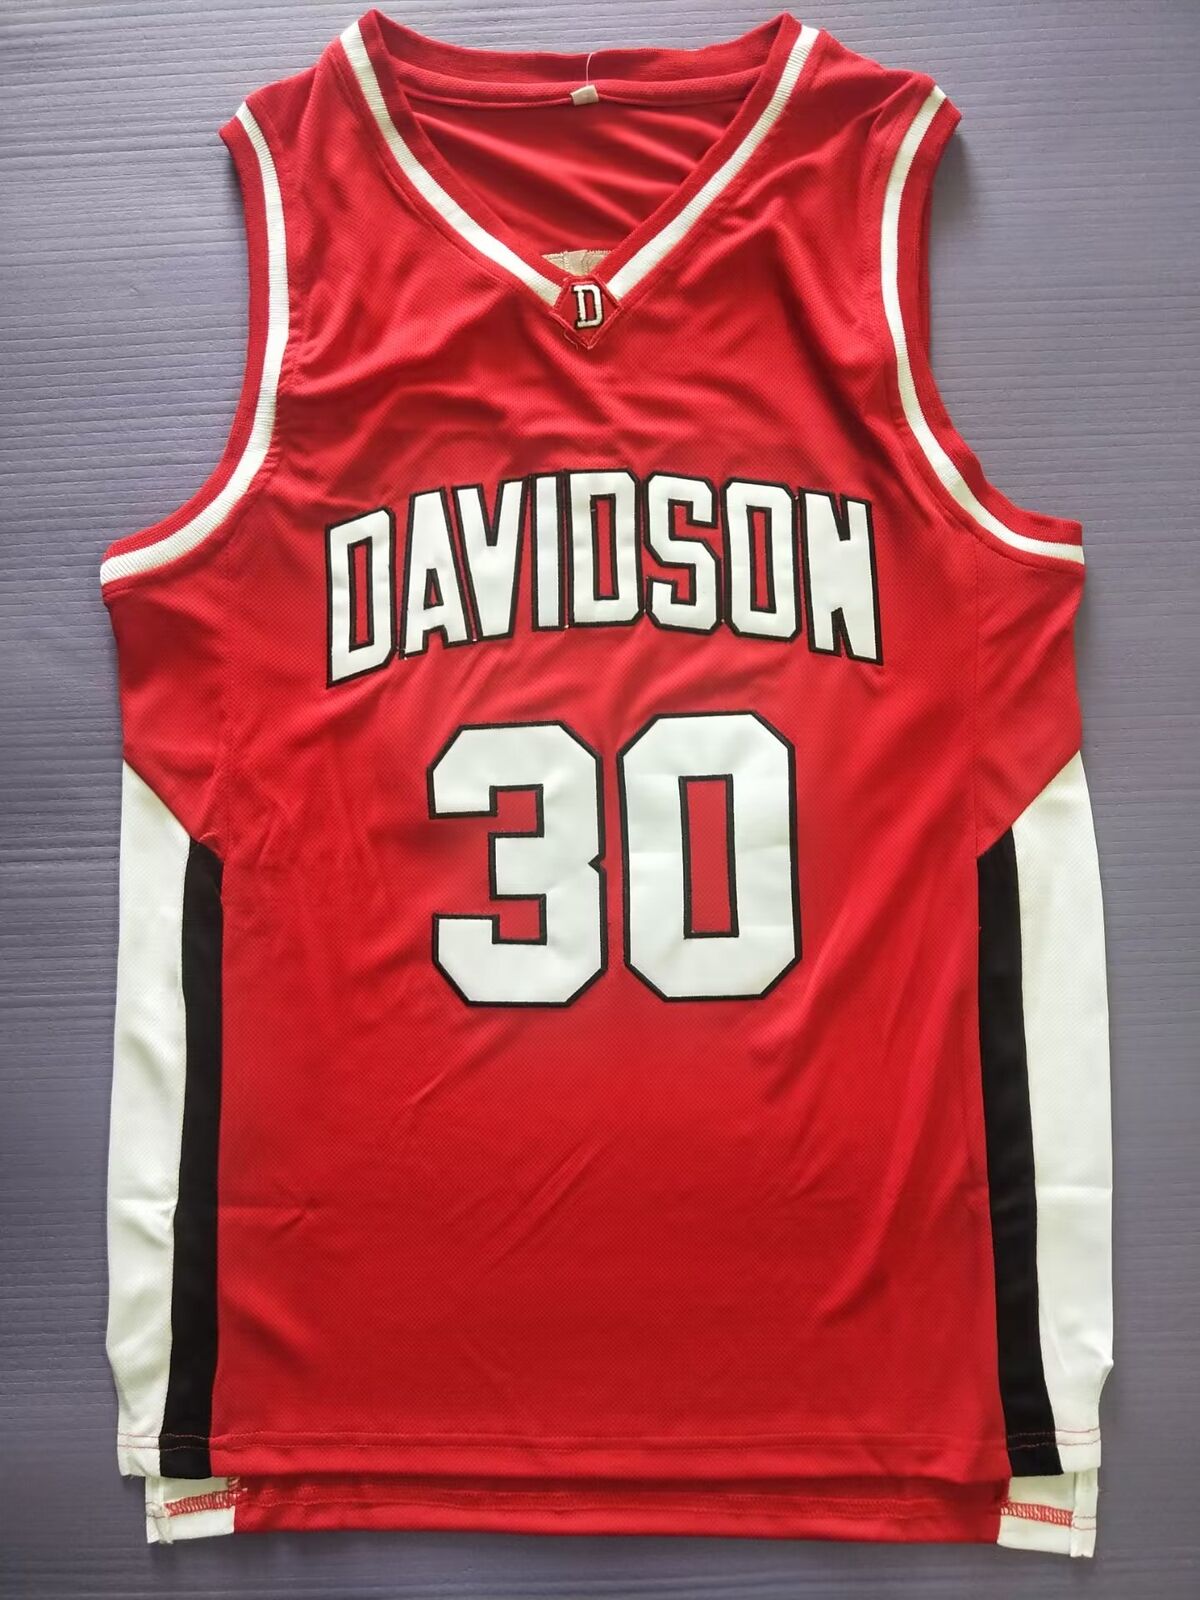 Retro Vintage Throwback Curry # 30 Davidson College Basketball Jersey Embroidery